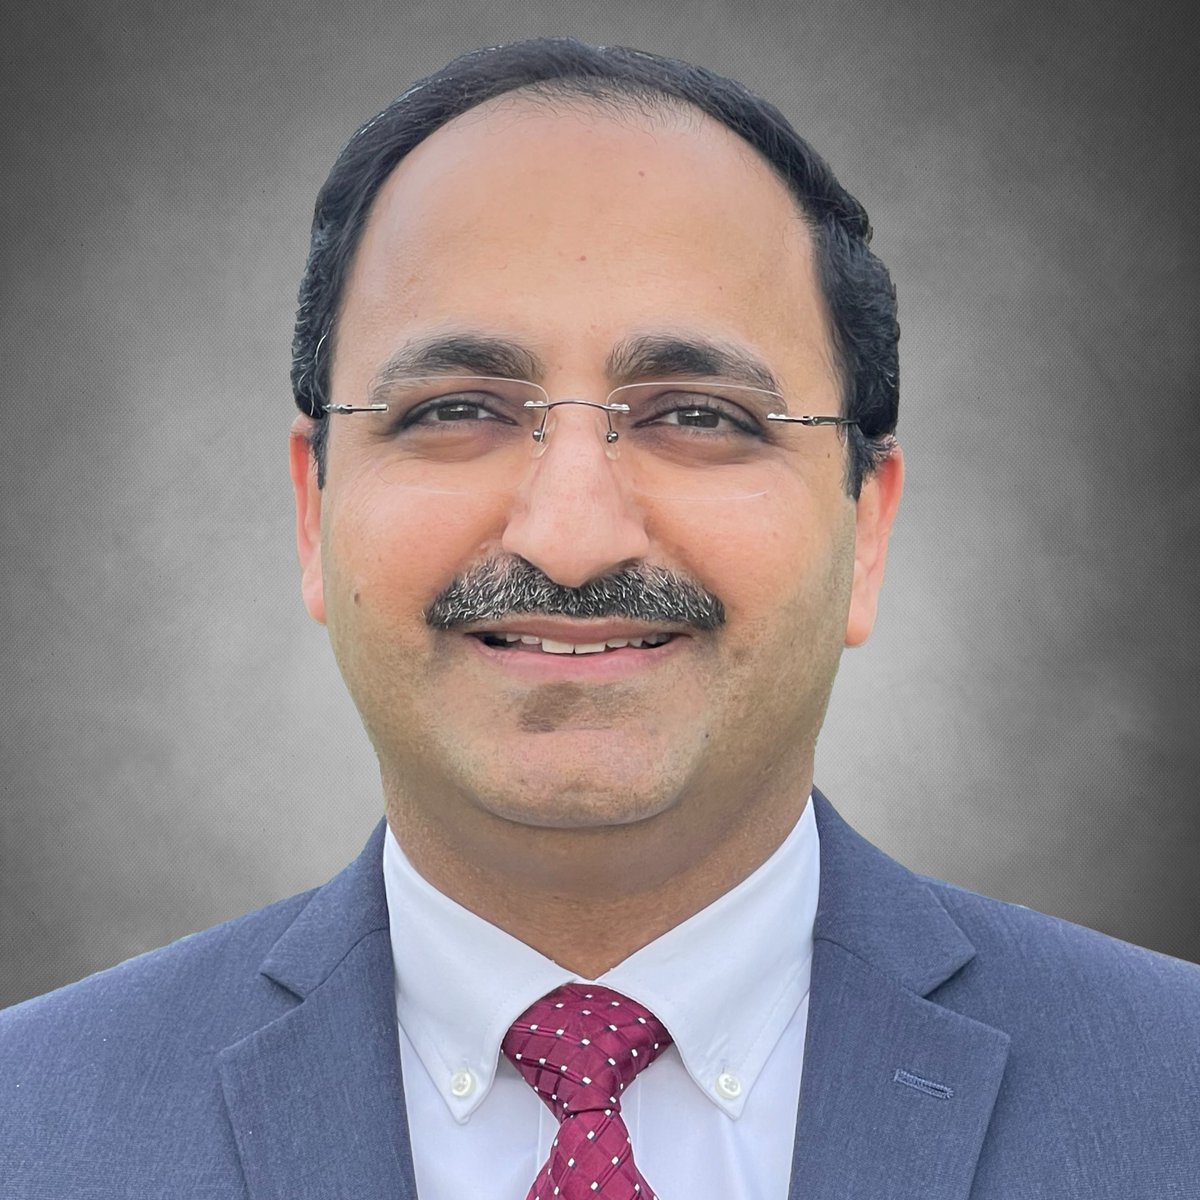 As SUNY Empire continues to grow, we welcome Hitesh Rai Kathuria, Ph.D. to the community. He will serve as provost and executive vice president for academic affairs. Please give him a warm welcome!